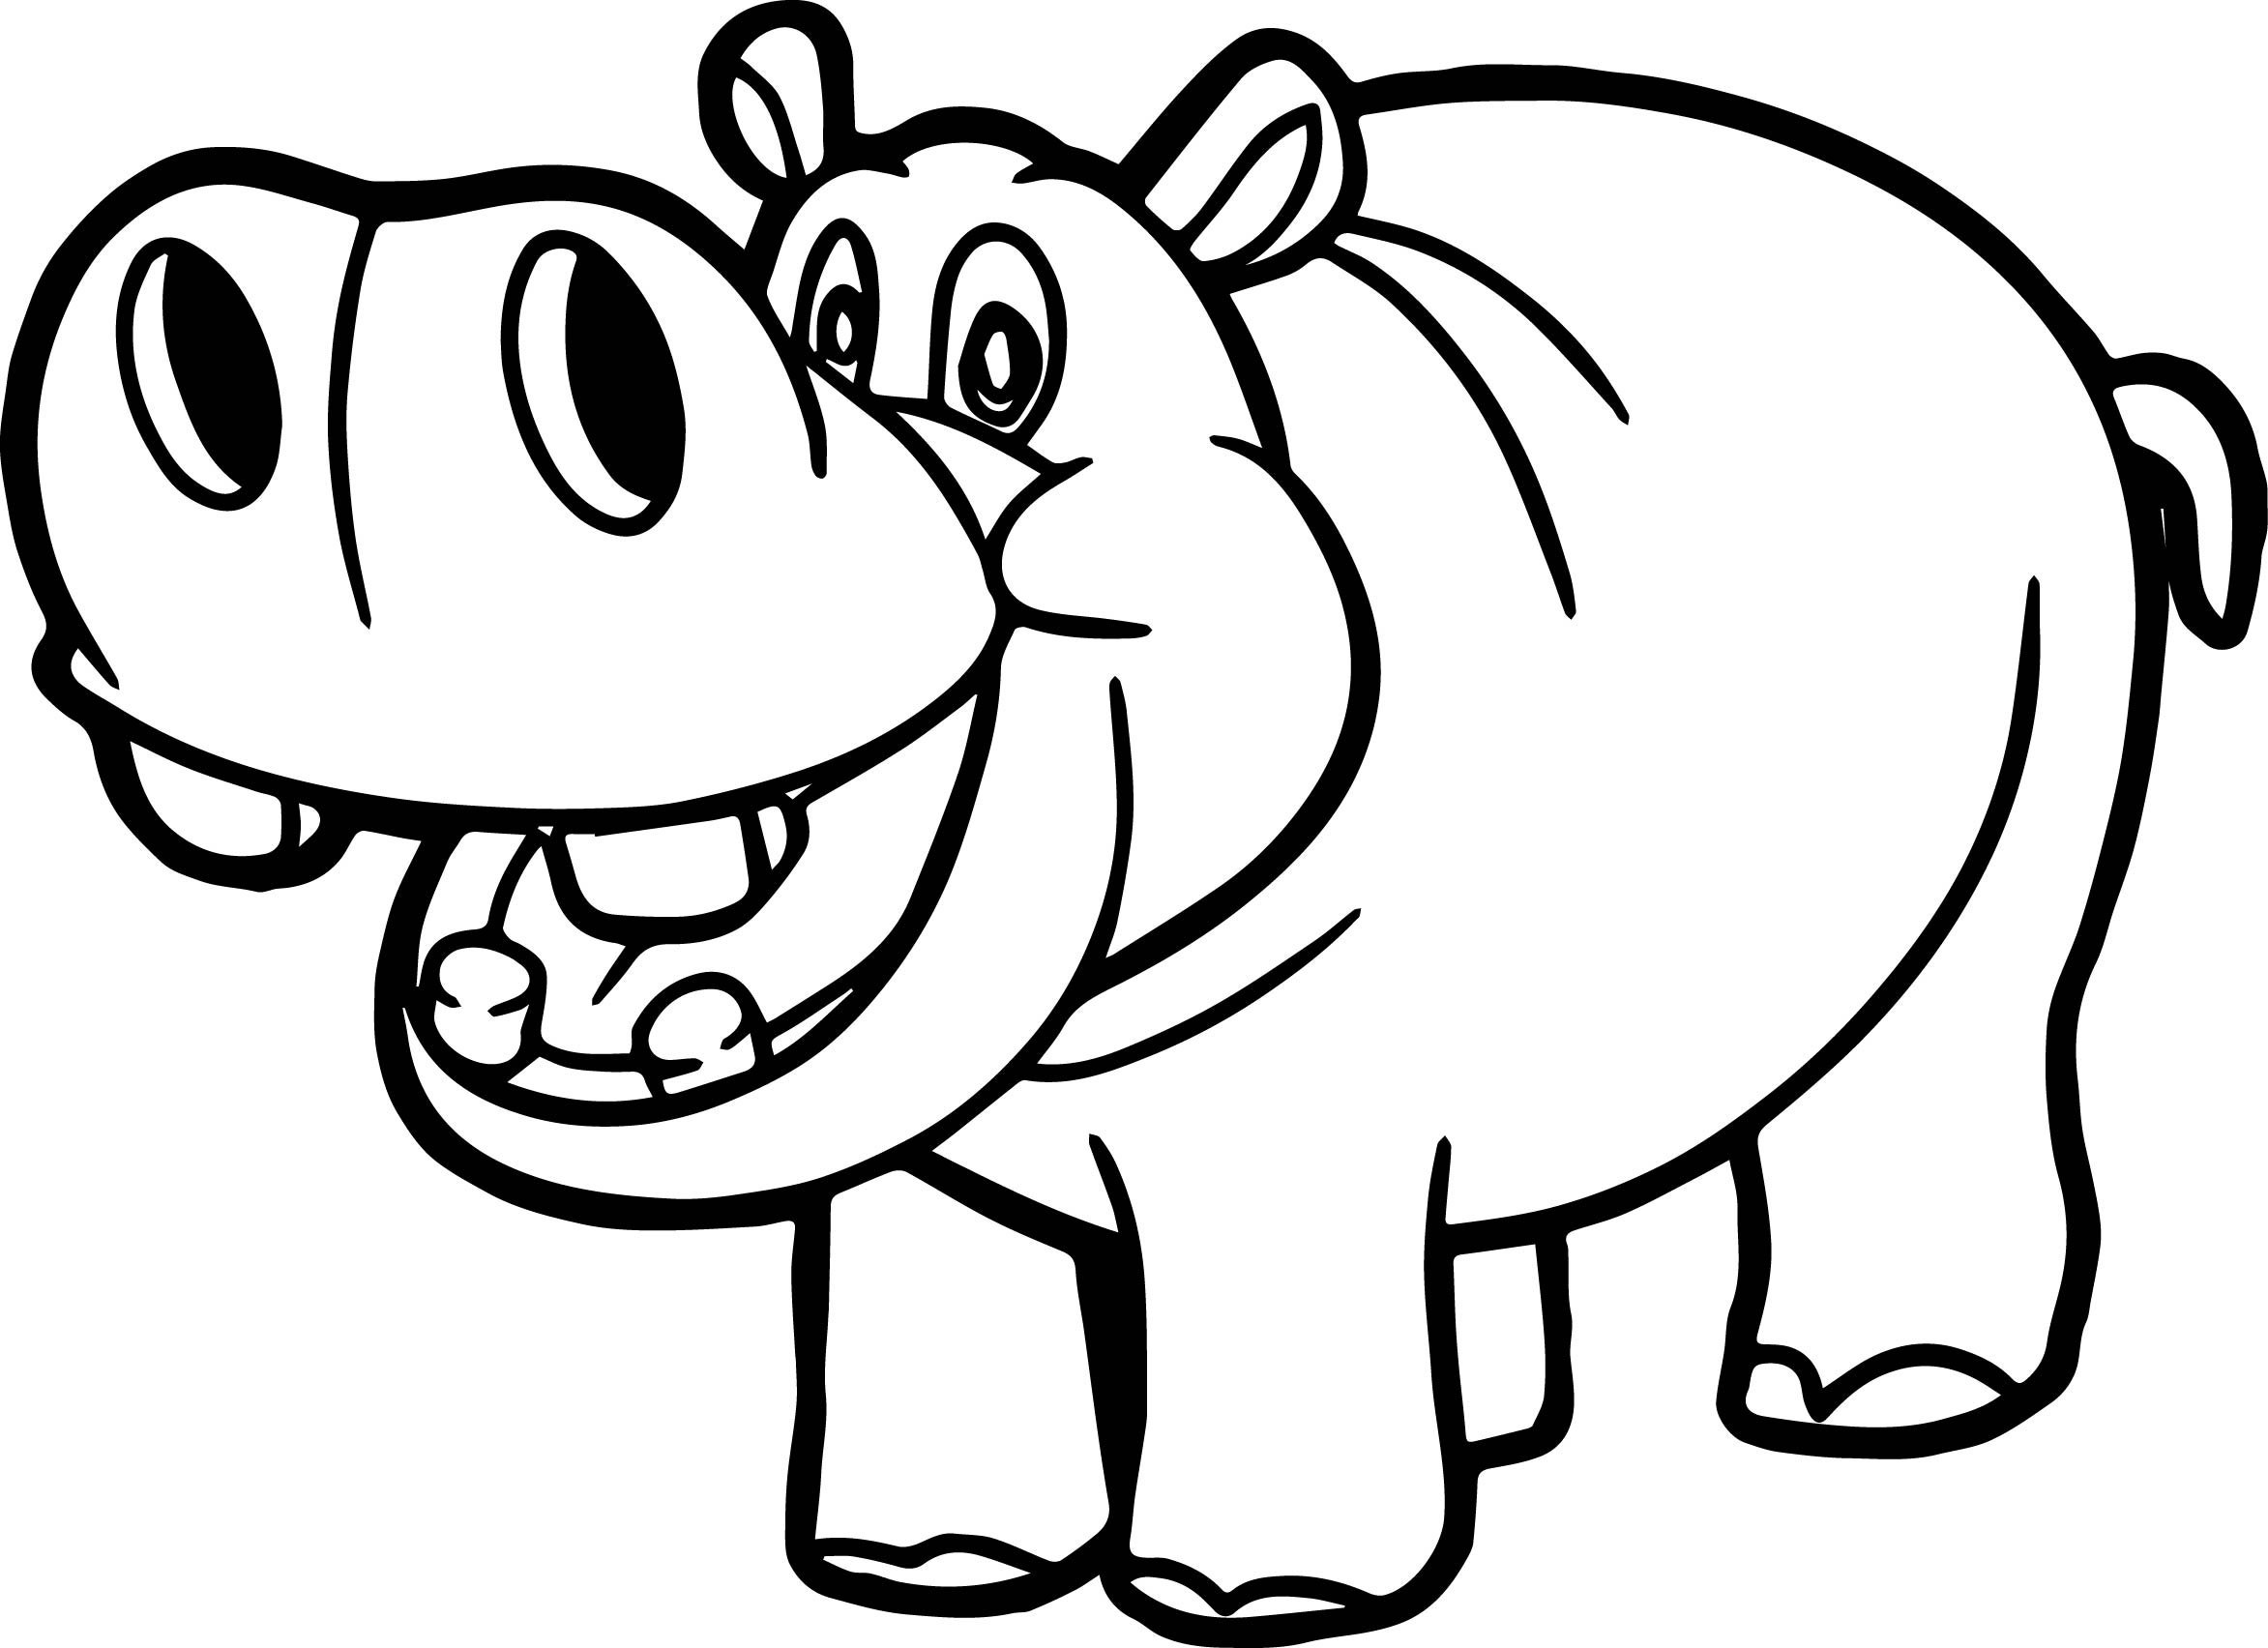 Funny Hippo Smiling Coloring Page Free Printable Coloring